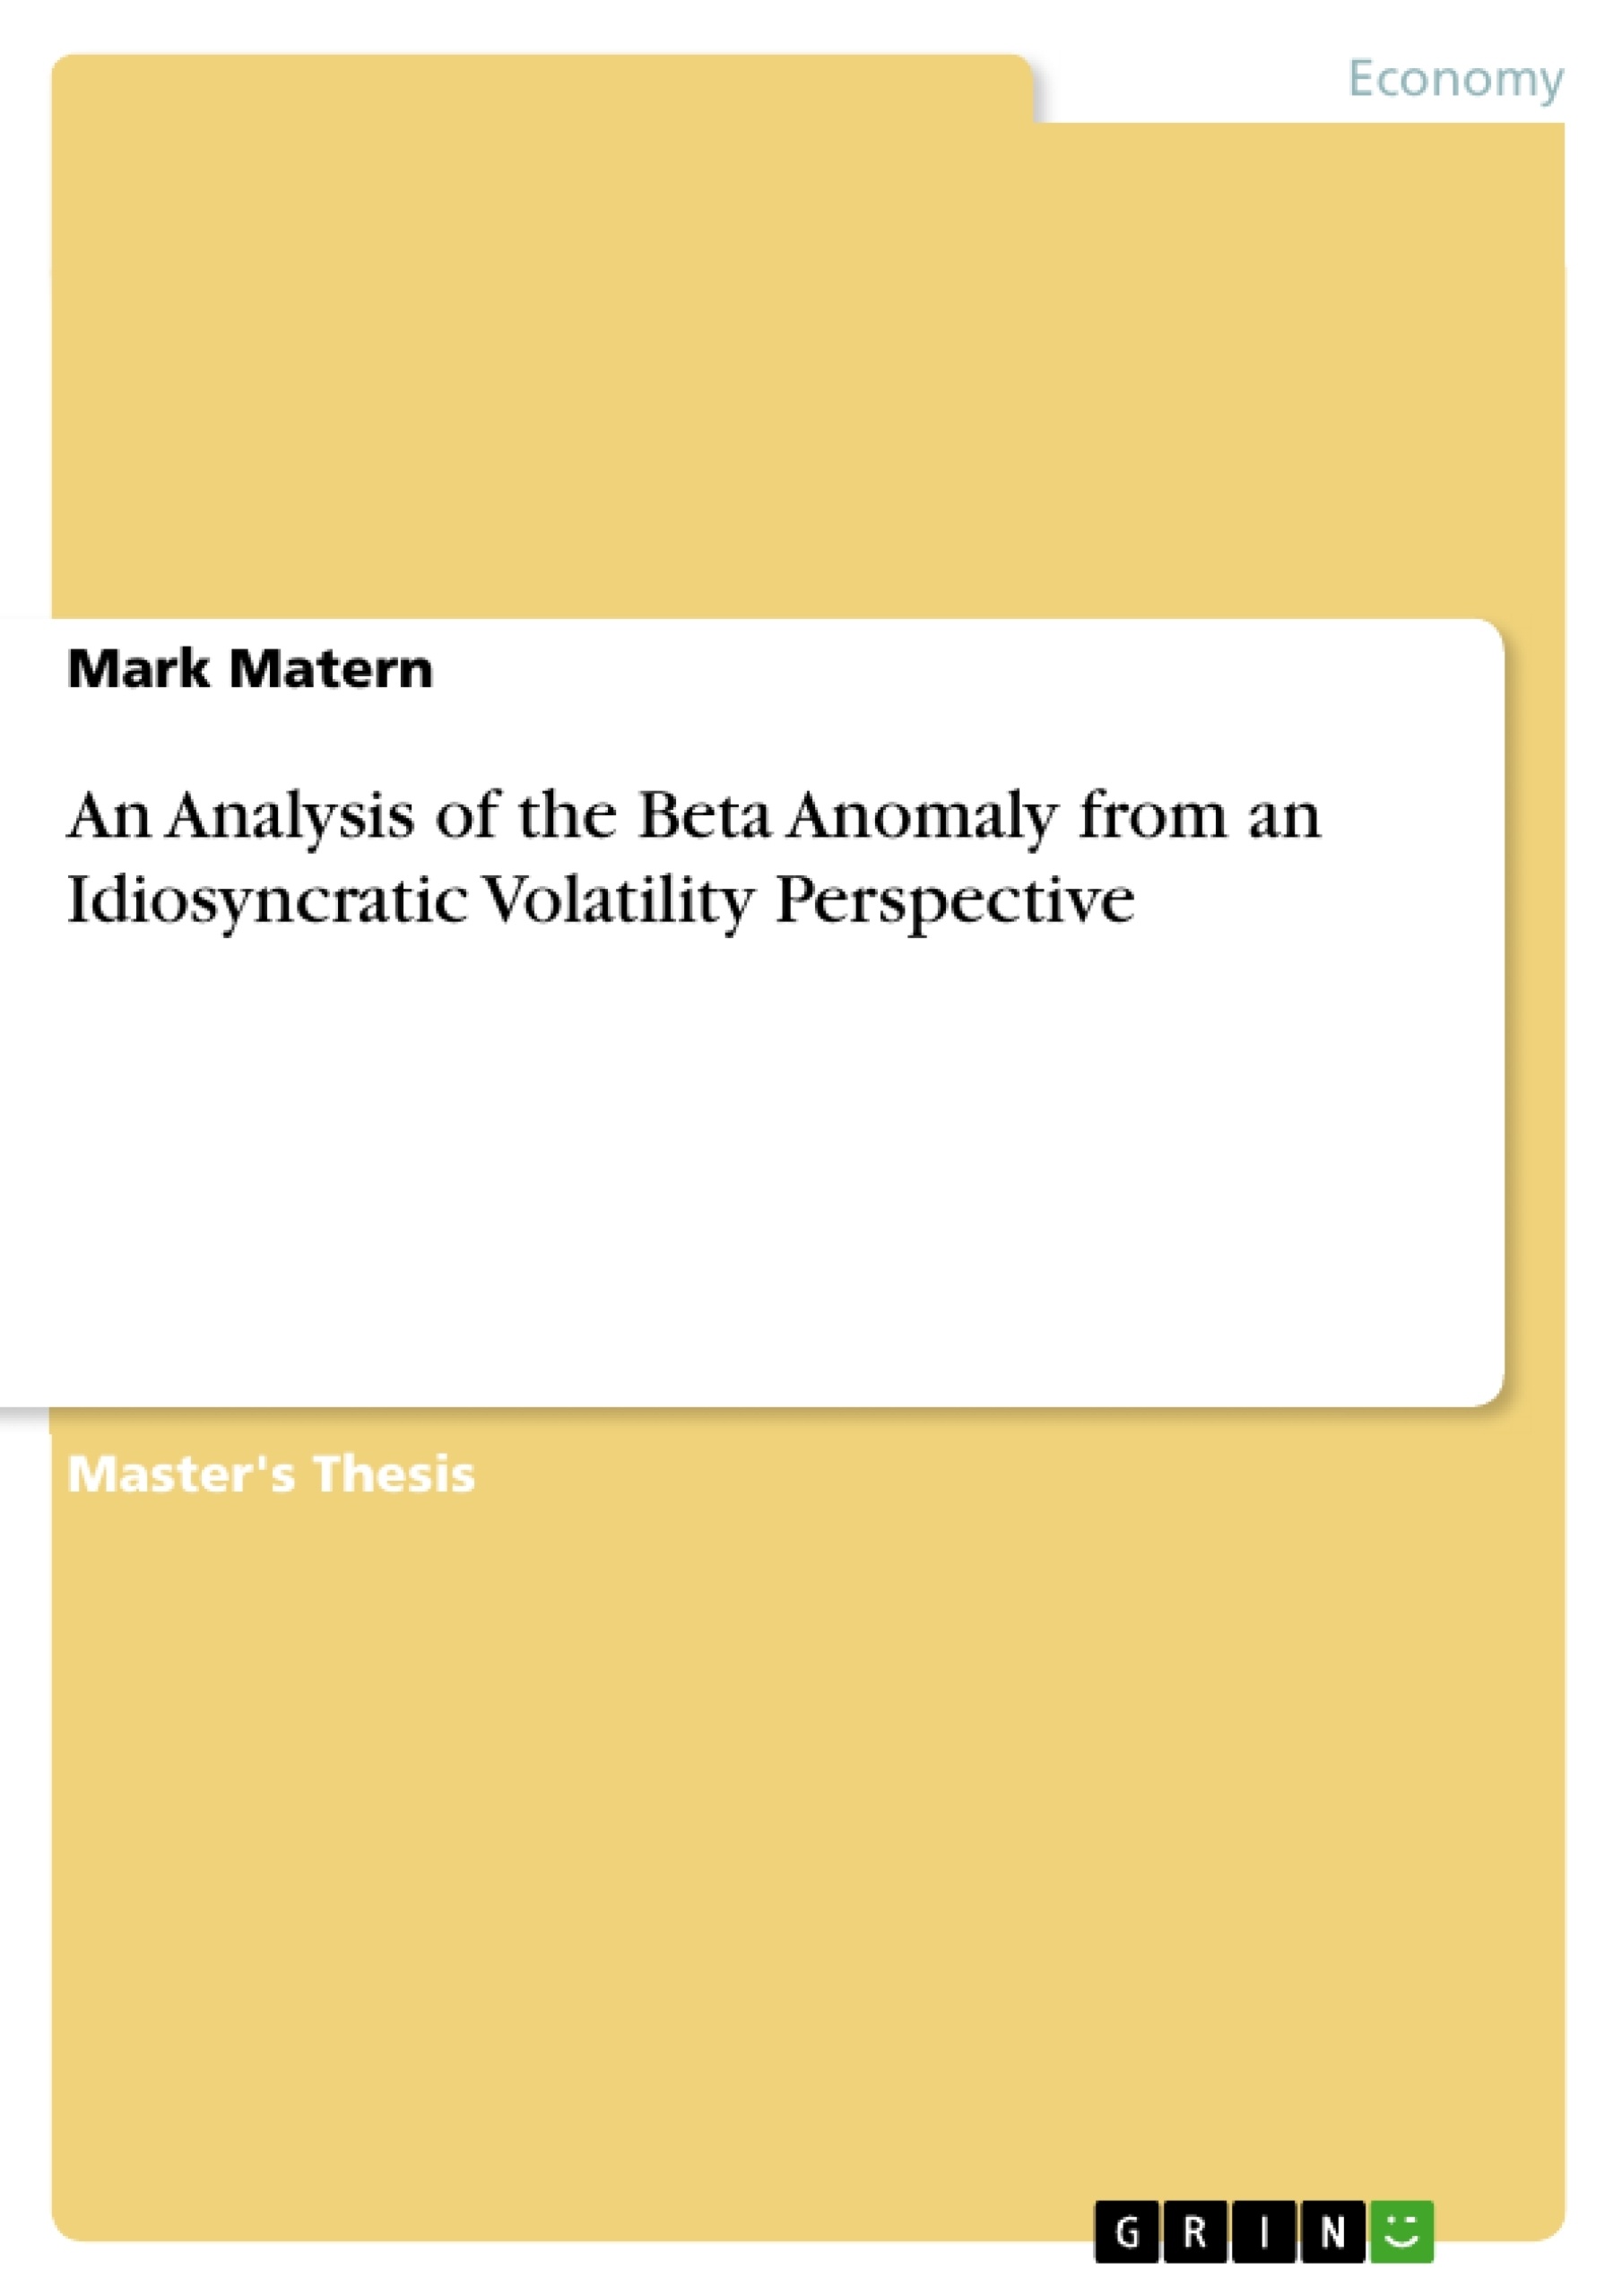 Titre: An Analysis of the Beta Anomaly from an Idiosyncratic Volatility Perspective